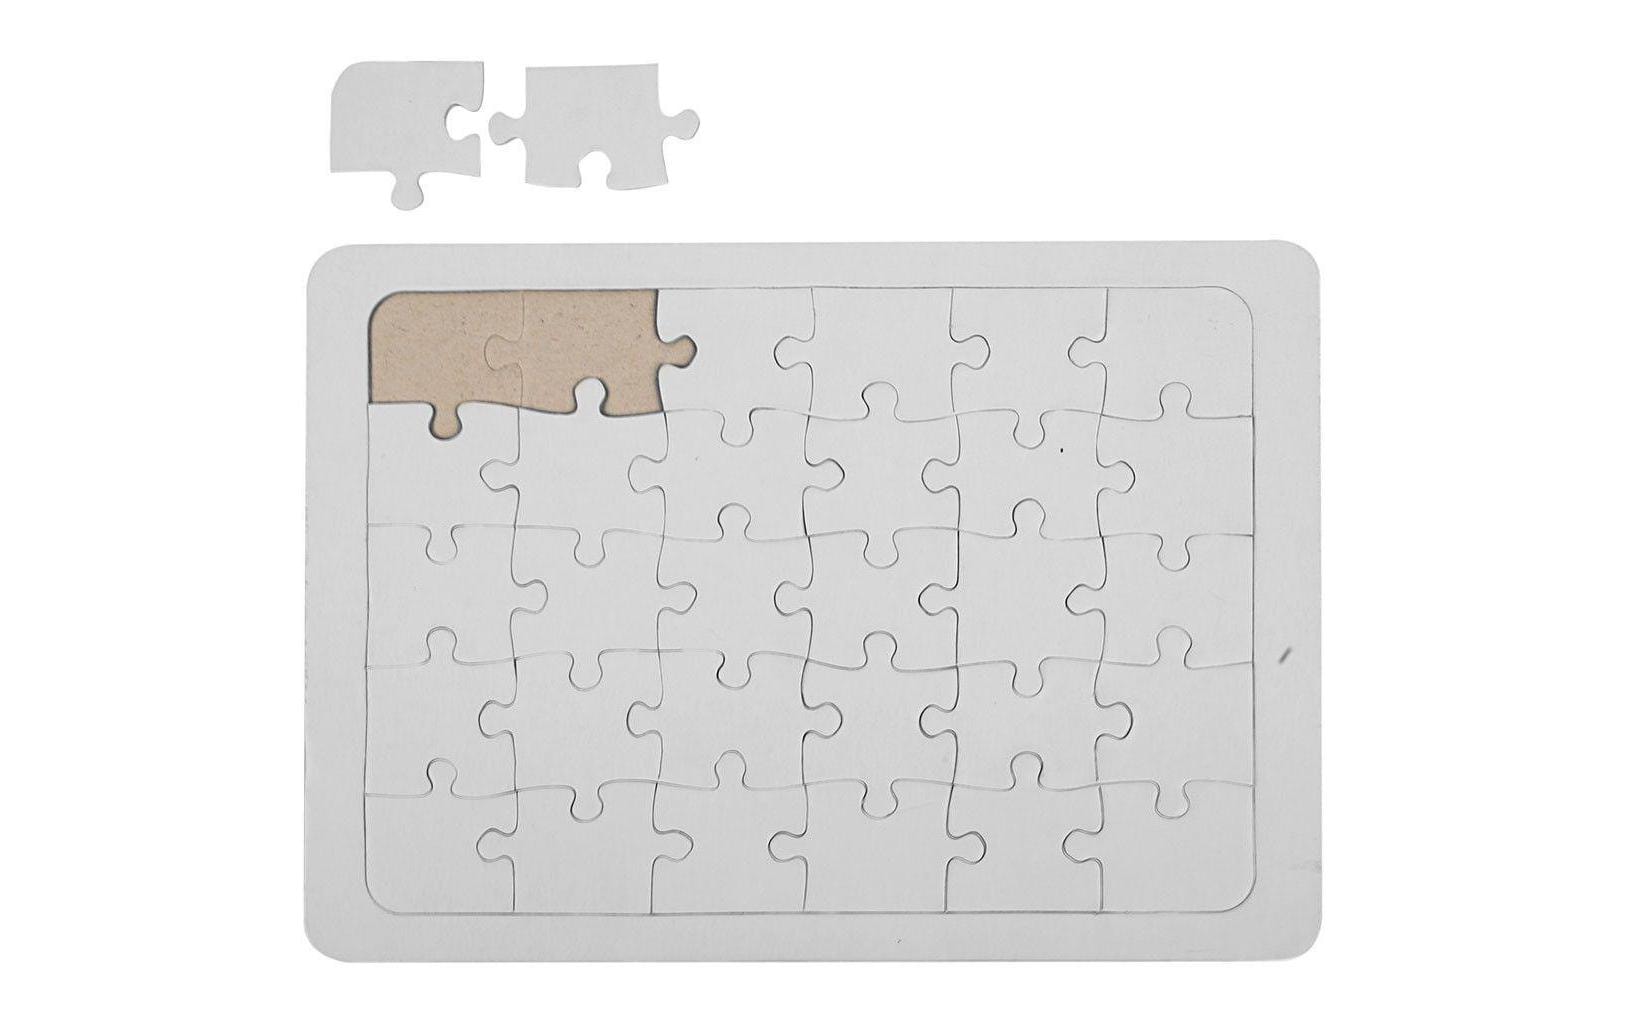 Creativ Company Puzzle Puzzle A5, Weiss, 1 Stk.